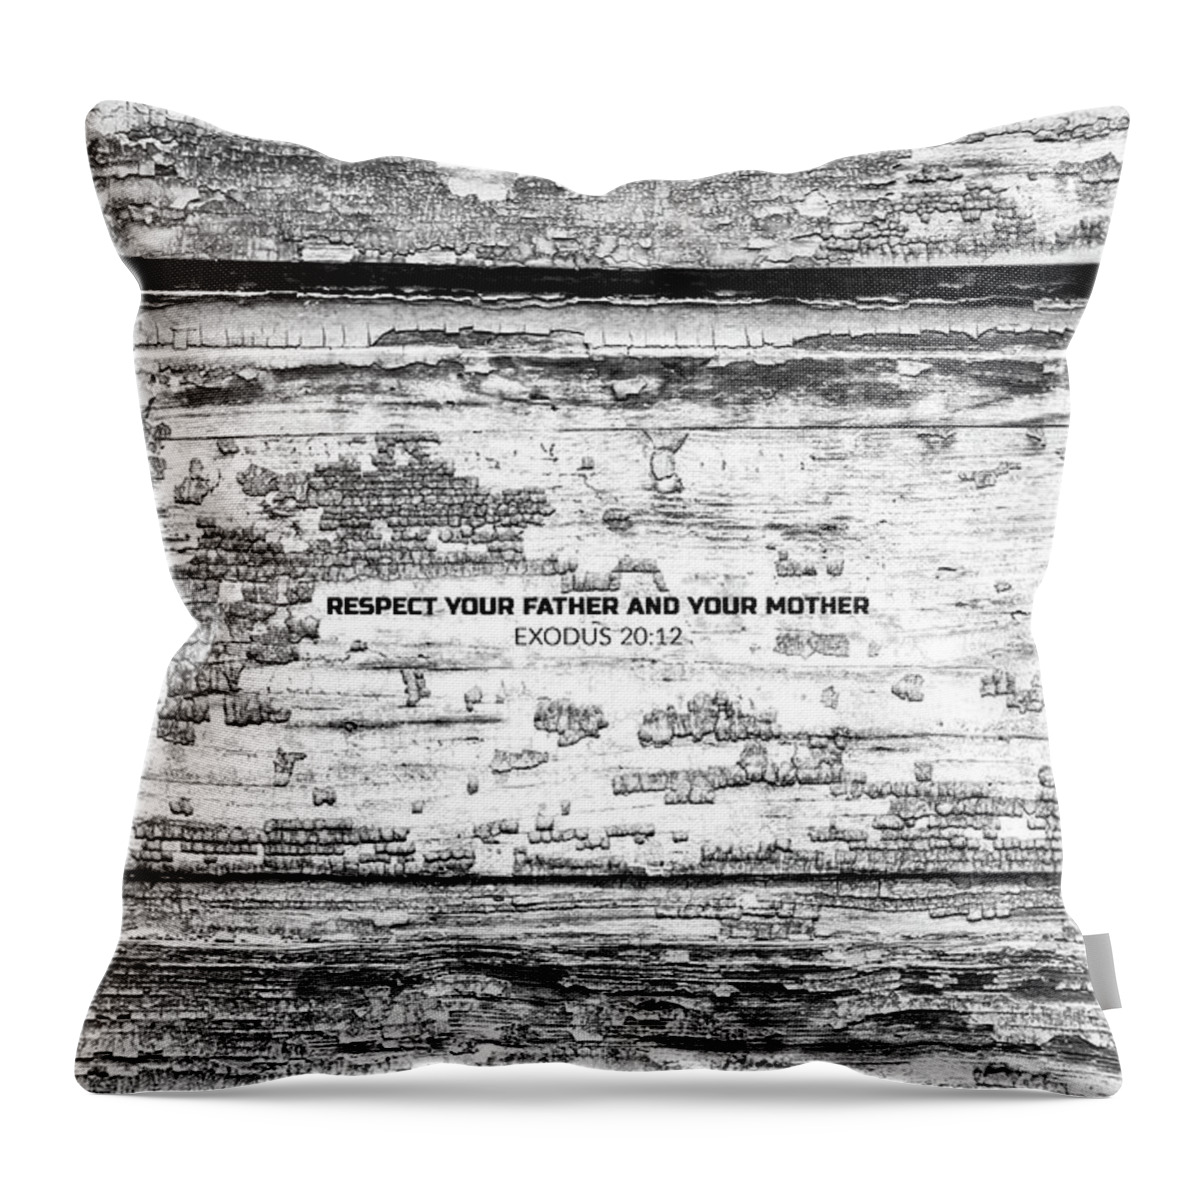 Ten Commandments Throw Pillow featuring the photograph Respect your father and your mother - the ten commandments series by Viktor Wallon-Hars